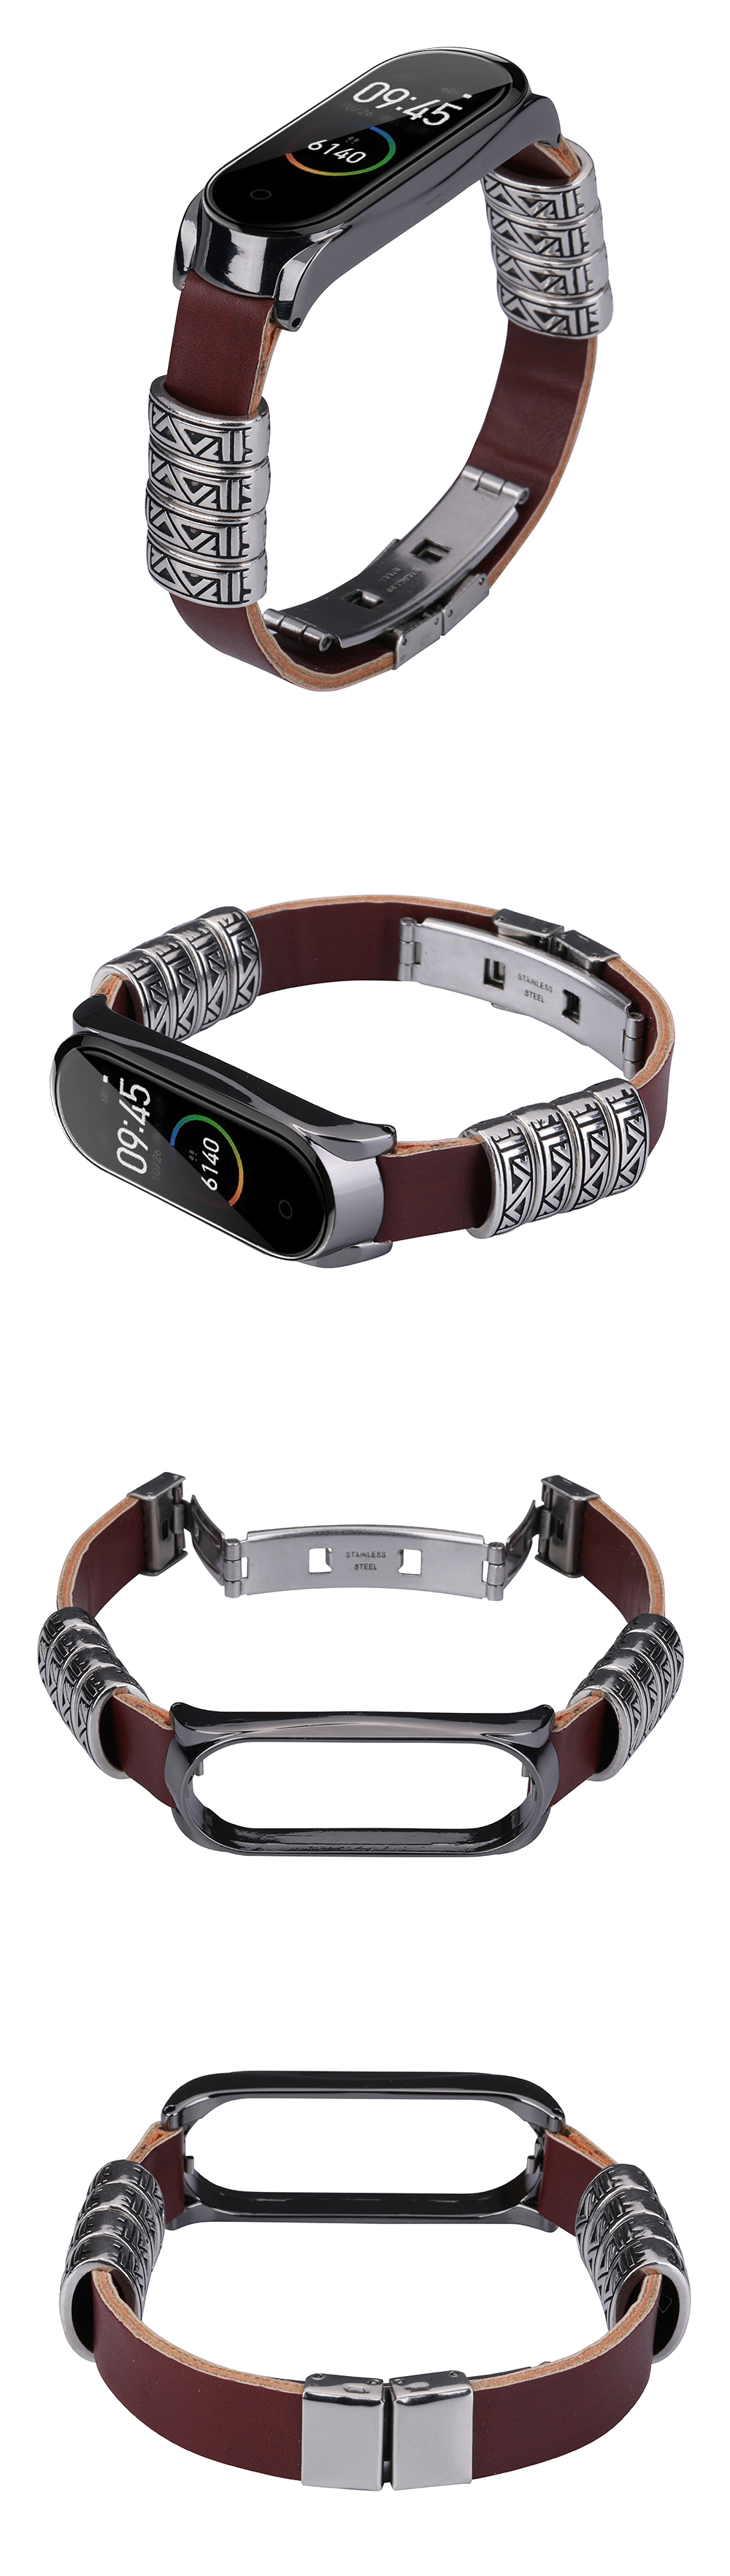 Bakeey-Retro-Butterfly-Push-Button-Deployment-Buckle-Metal-Watch-Band-Strap-Replacement-for-Xiaomi-M-1614264-3